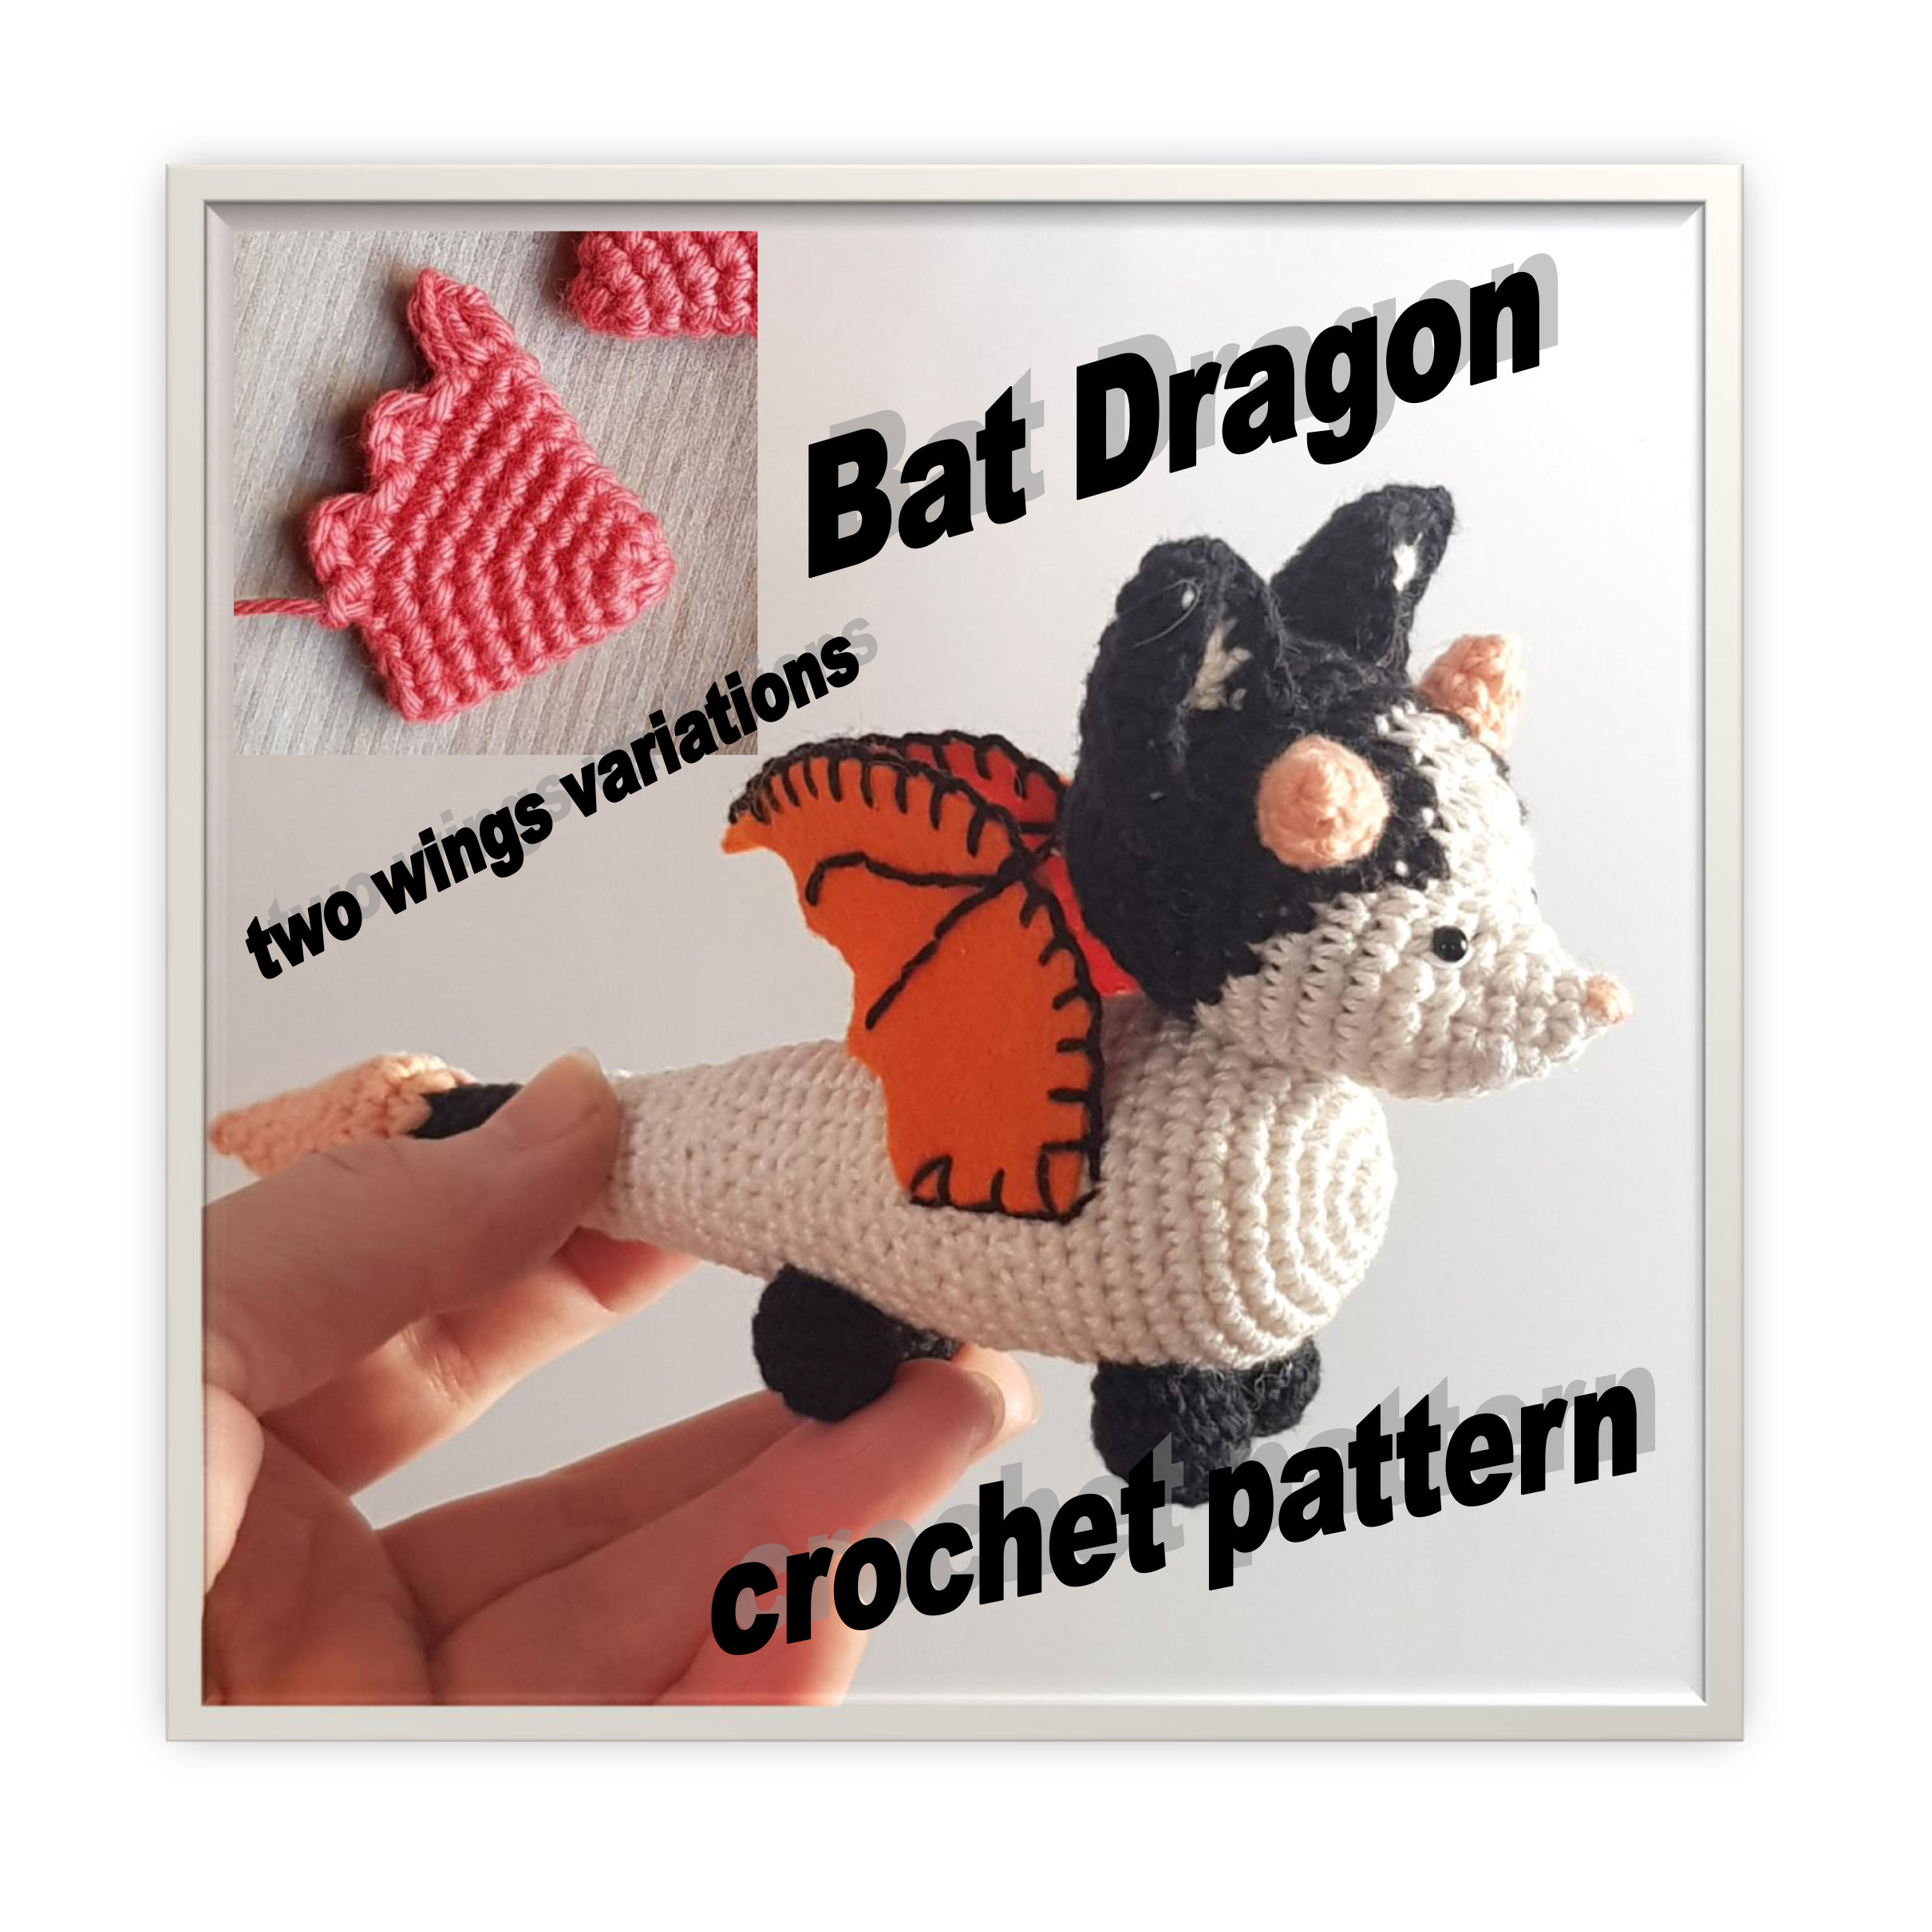 Adopt Me! Legendary Pet Bat Dragon Plush (Comes with Witch Hat